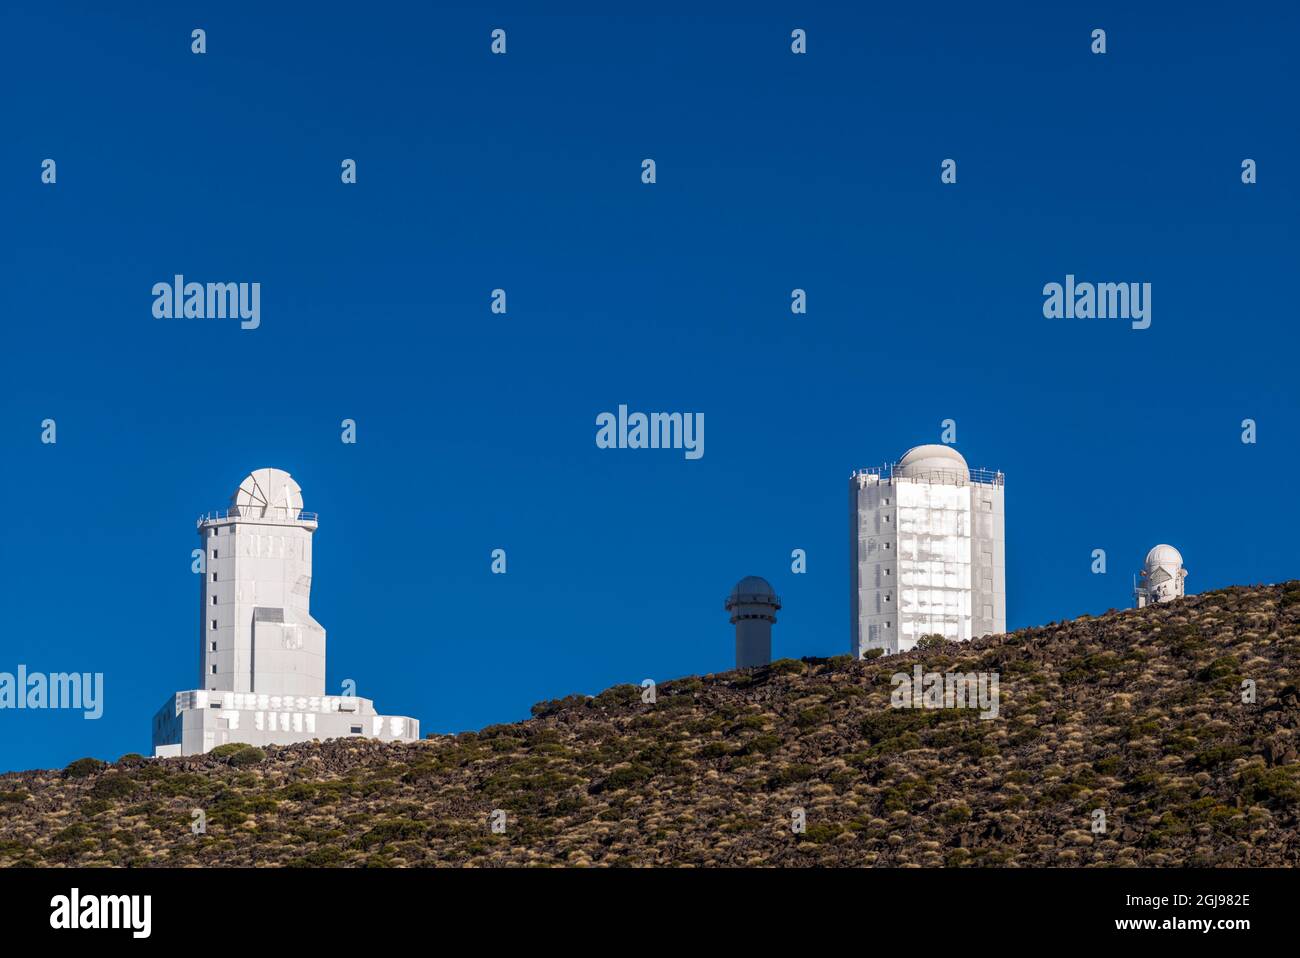 Spain, Canary Islands, Tenerife Island, El Teide Mountain, Observatorio del Teide, astronomical observatory, late afternoon Stock Photo